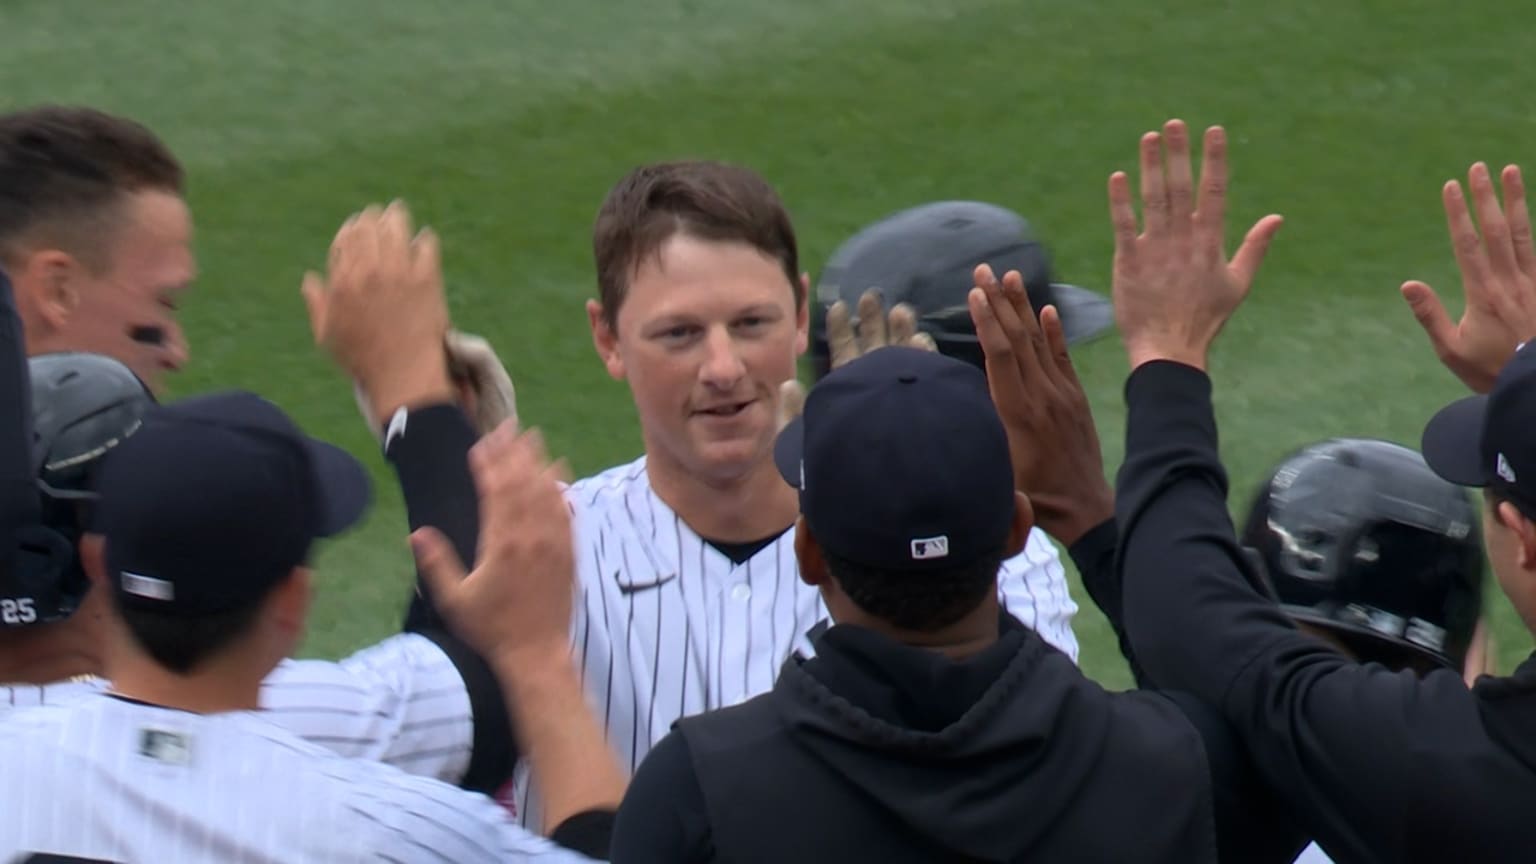 MLB wrap: Yankees top Athletics with walkoff home run from DJ LeMahieu